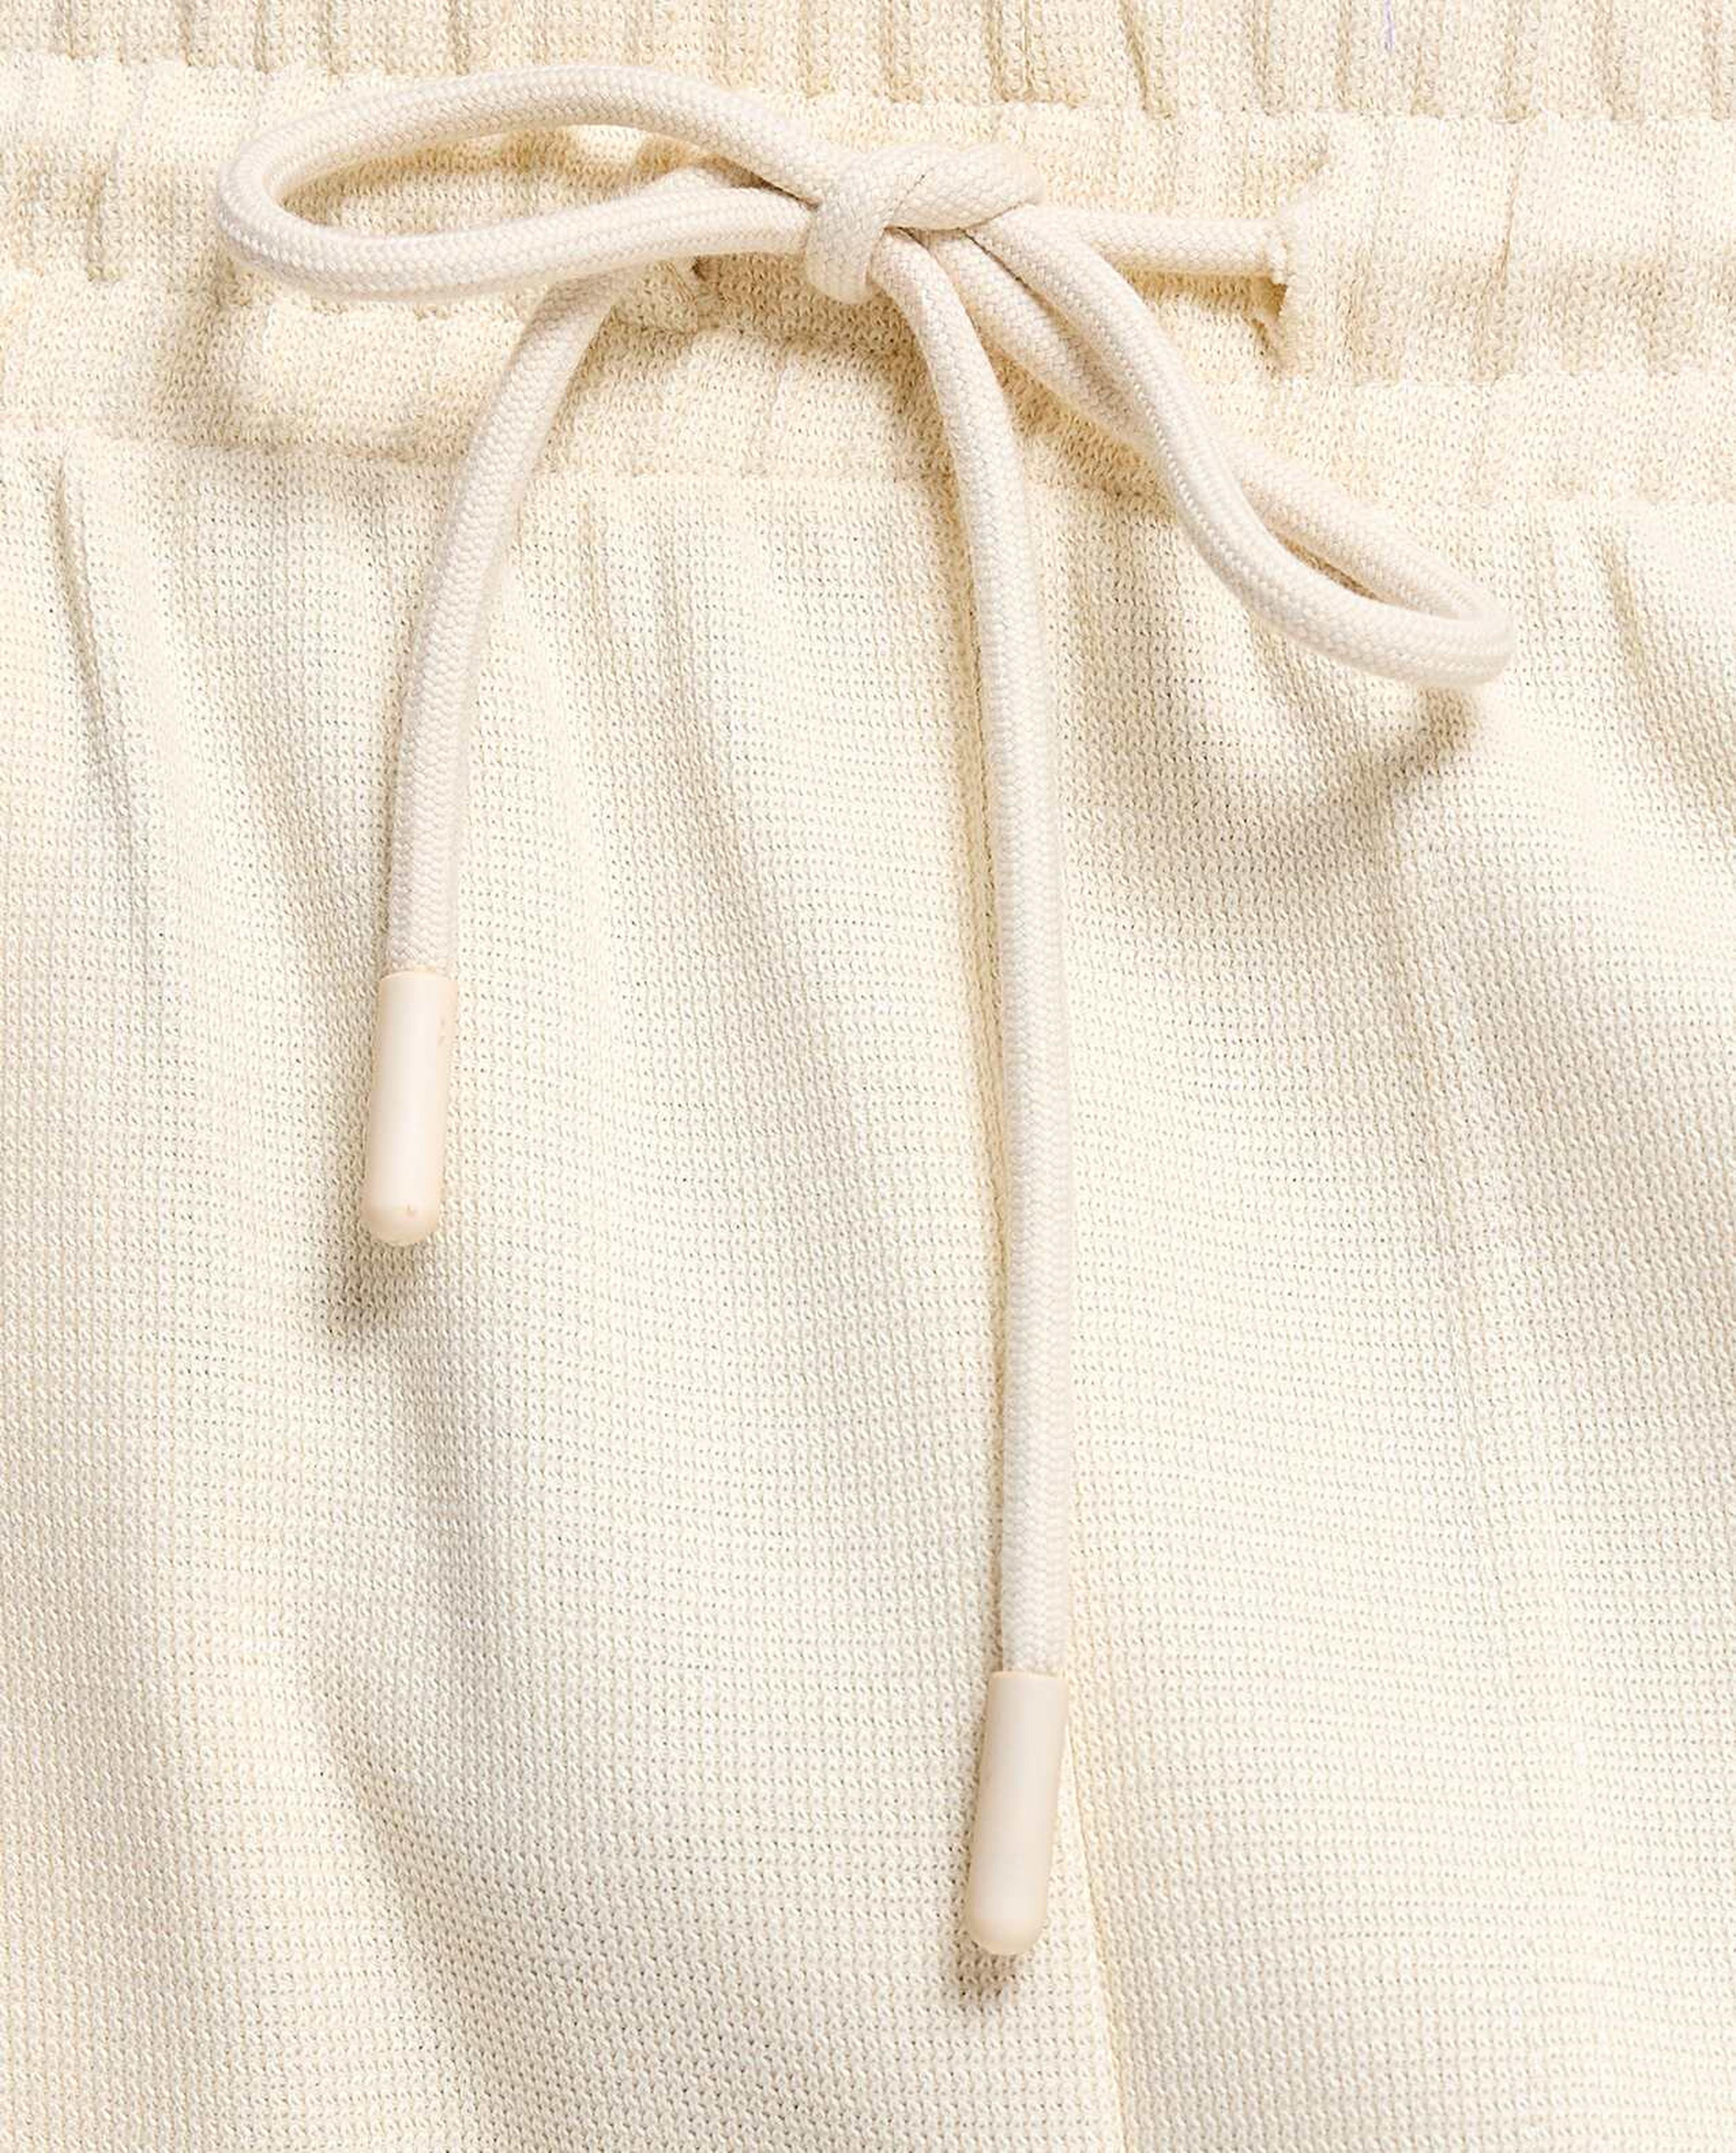 Solid Knit Shorts with Drawstring Waist